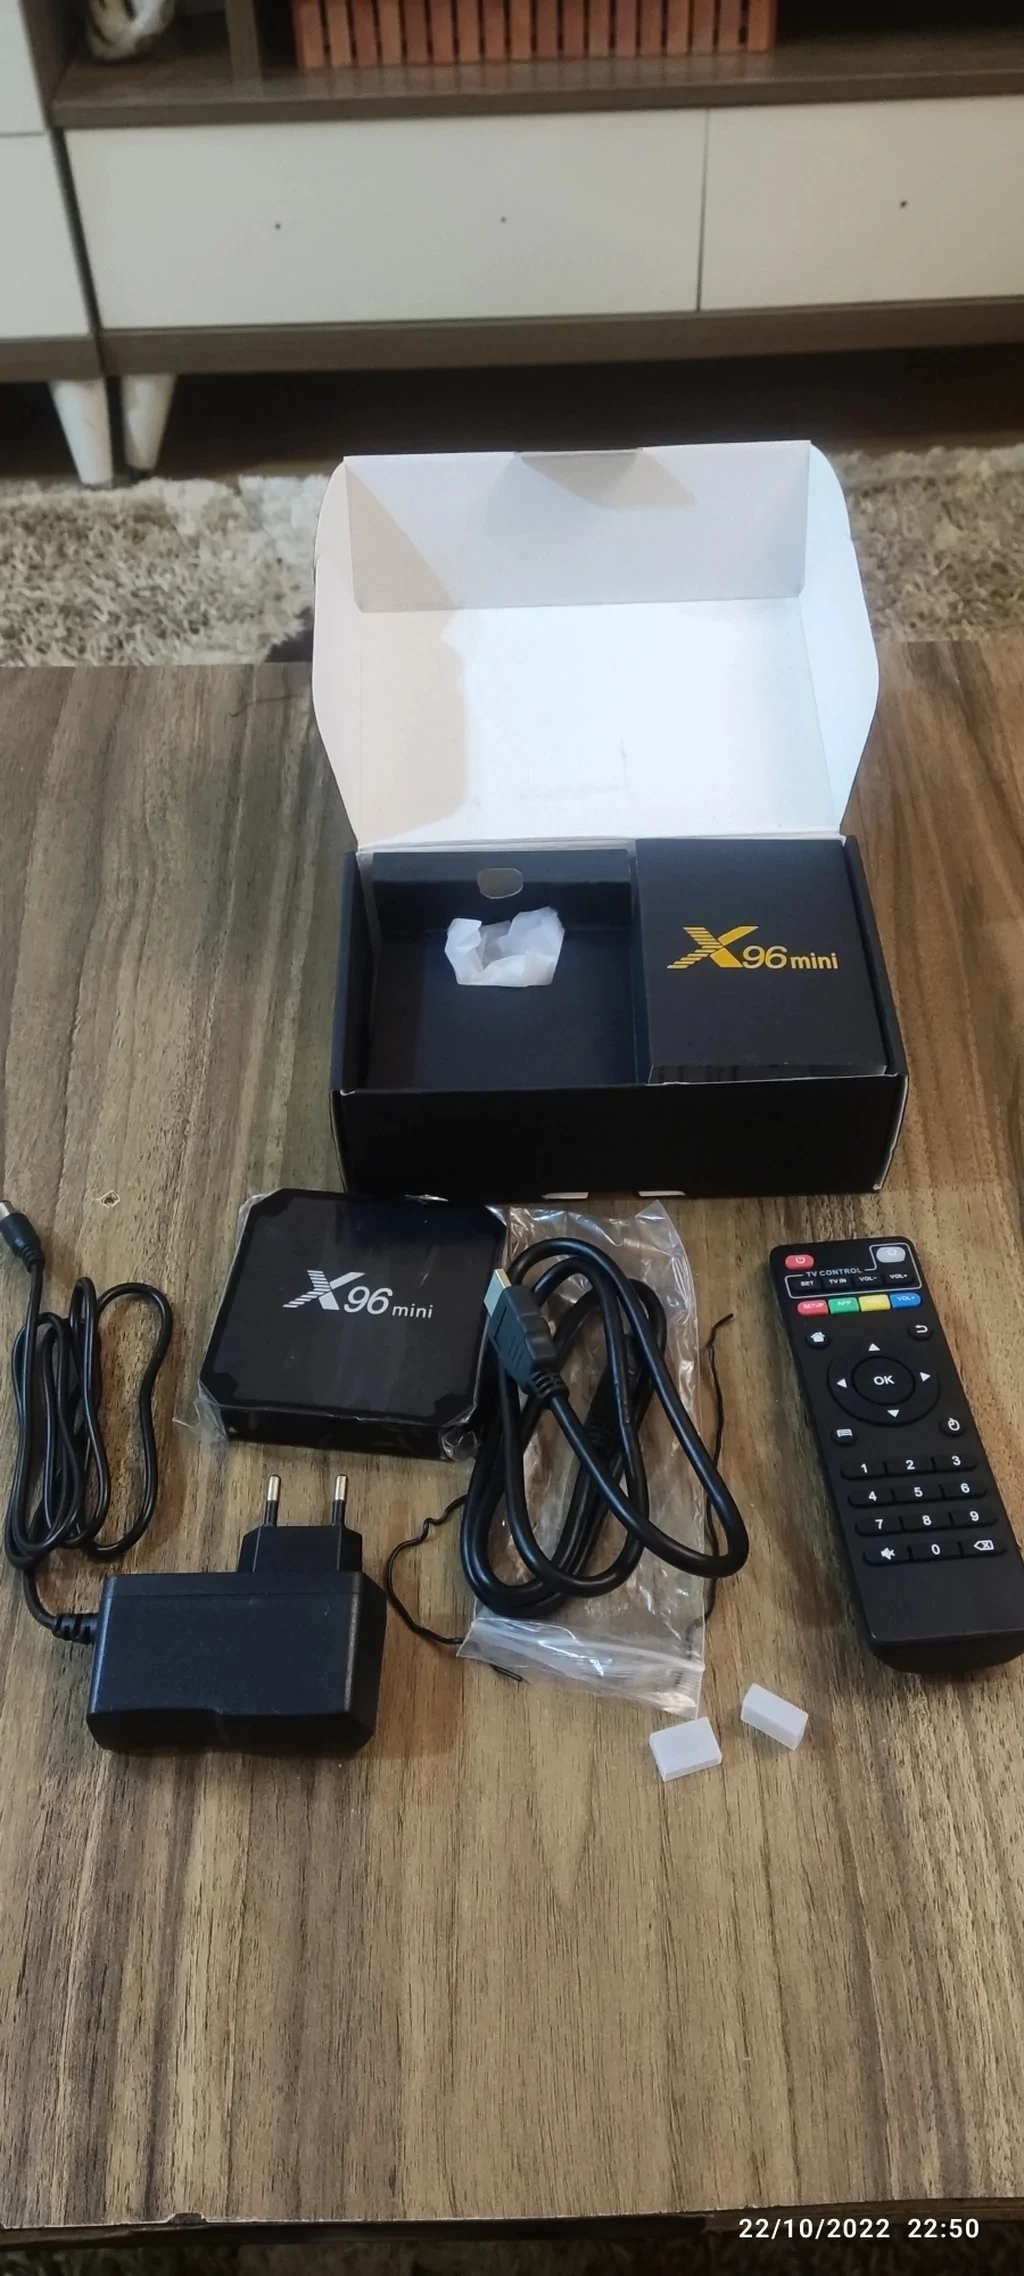 X96 Mini Amlogic S905W Android TV Box Sells for $25 and Up - CNX Software